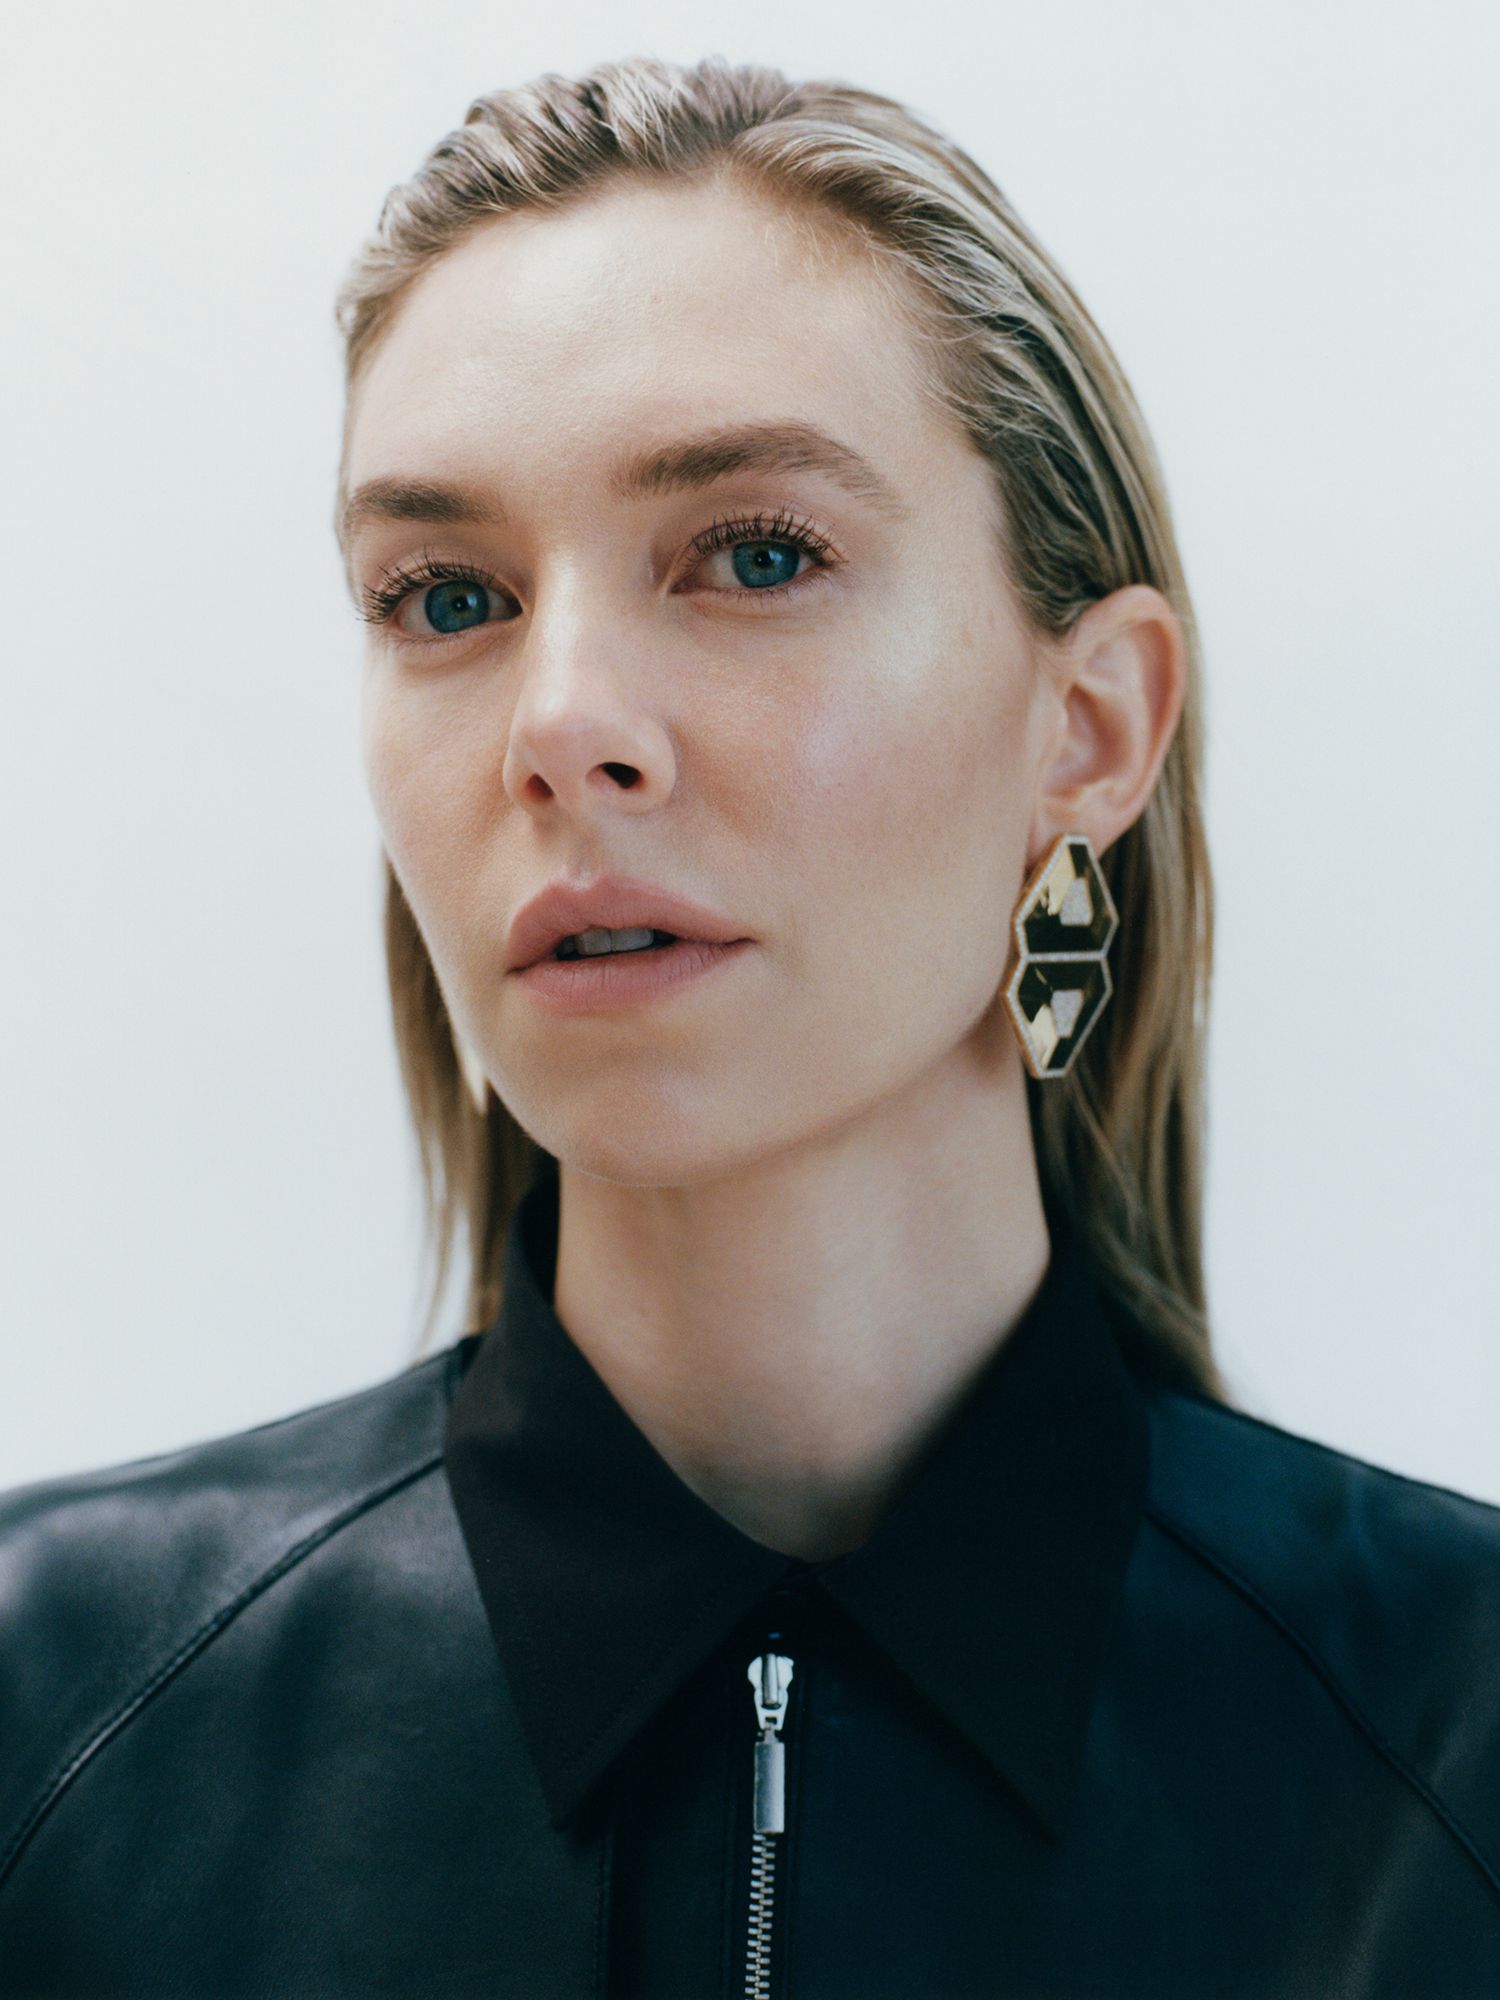 Vanessa-Kirby-by-Toby-Coulson-for-Porter-Magazine-April-2021-1.jpg